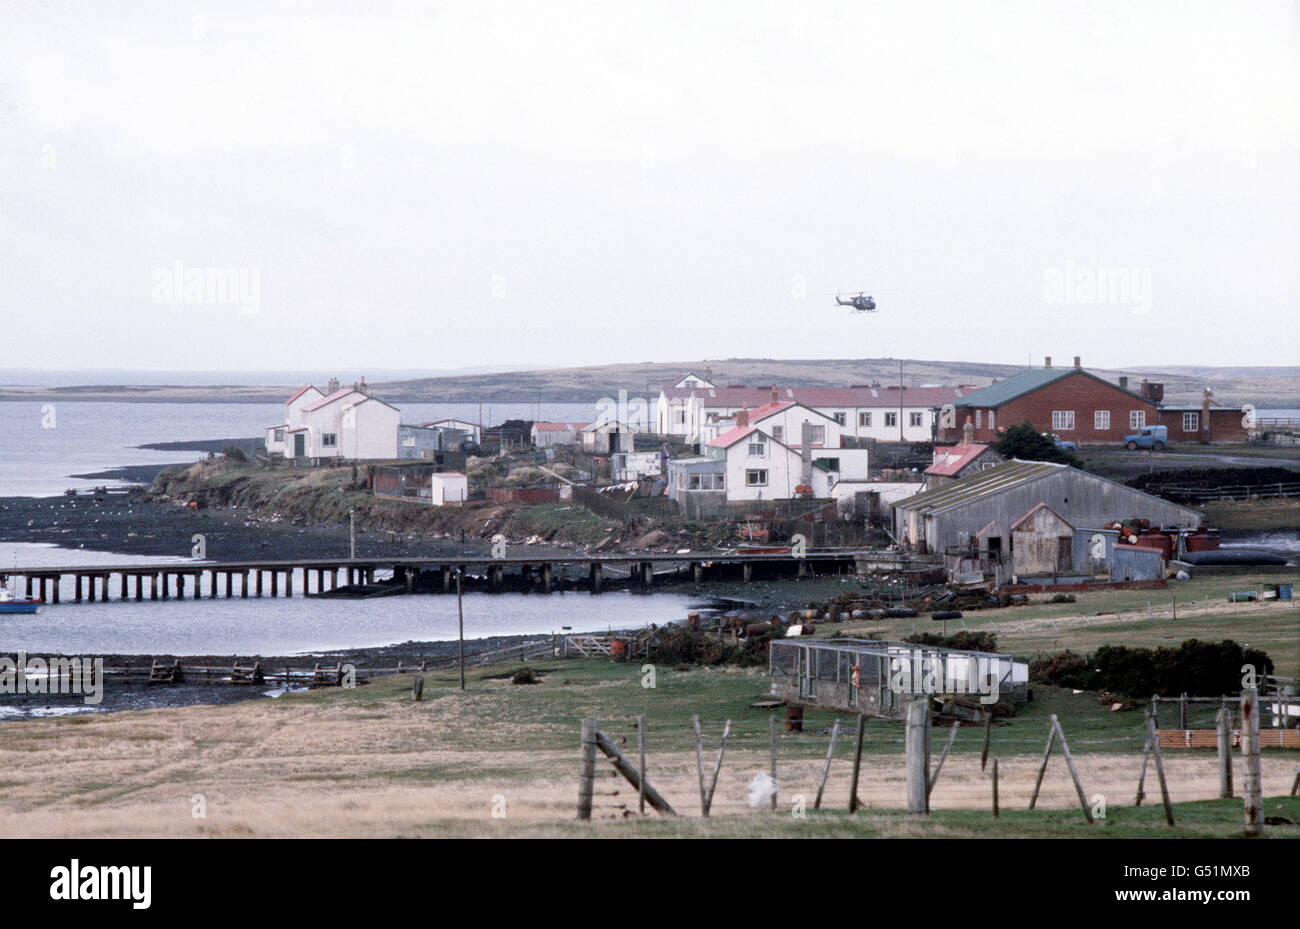 THE FALKLANDS WAR 1982: A general view of Goose Green, the East Falkland settlement which was recaptured from Argentine forces by paratroopers (2 Para) from the British Falklands Task Force on May 27th 1982. *25/03/02General view of Goose Green, the East Falkland settlement which was recaptured from Argentine forces by paratroopers (2 Para) from the British Falklands Task Force on May 27th 1982. The 20th anniversary of the invasion of the Falklands by Argentine forces will be on April 2nd, 2002. Stock Photo